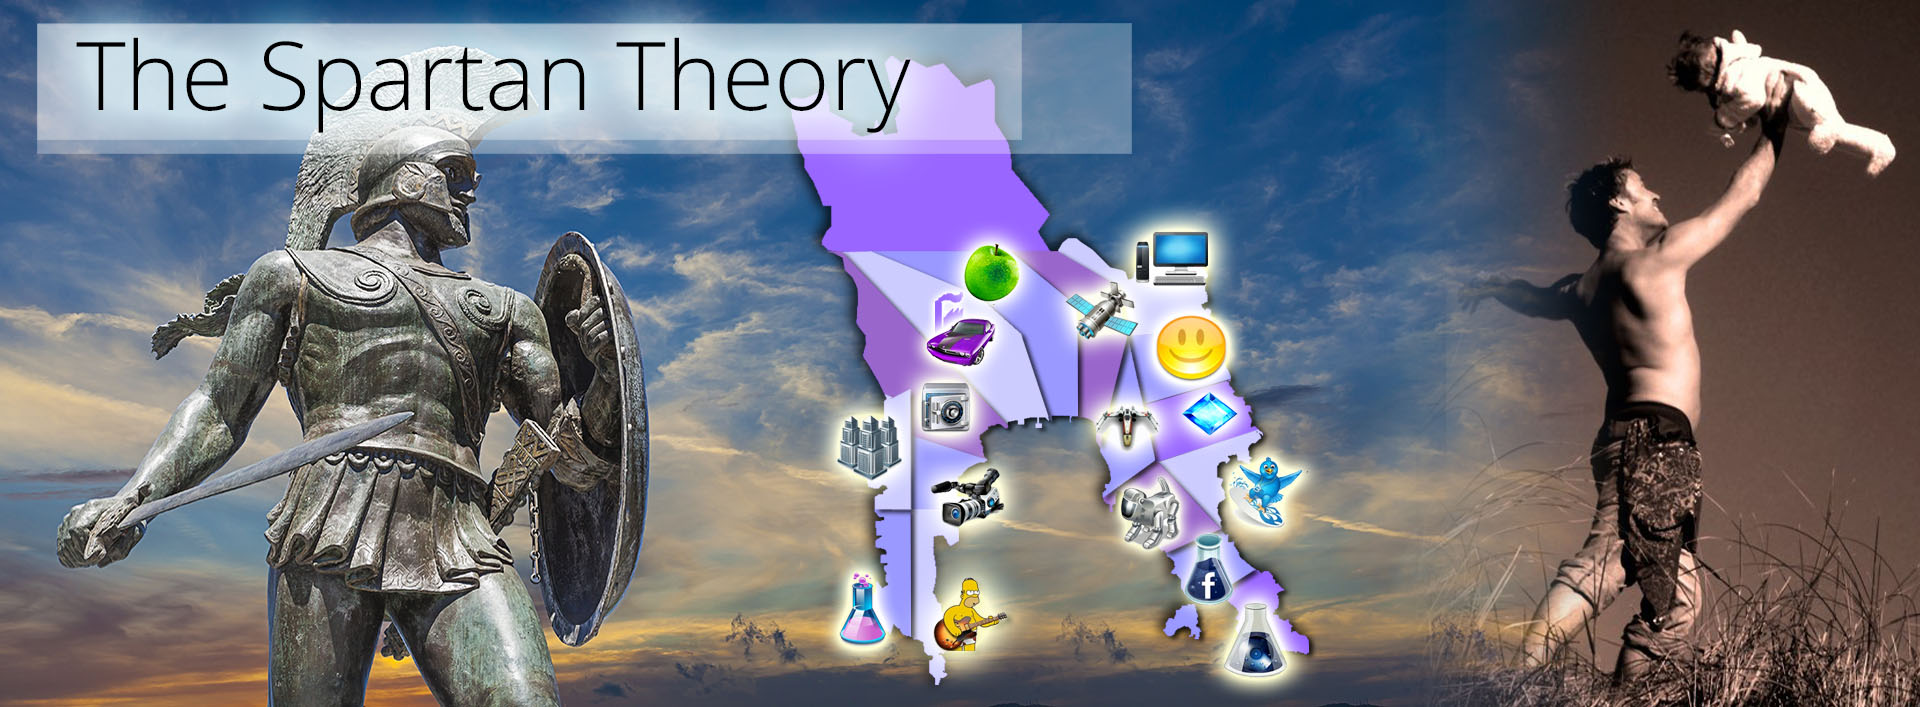 The_Spartan_Theory_1.03